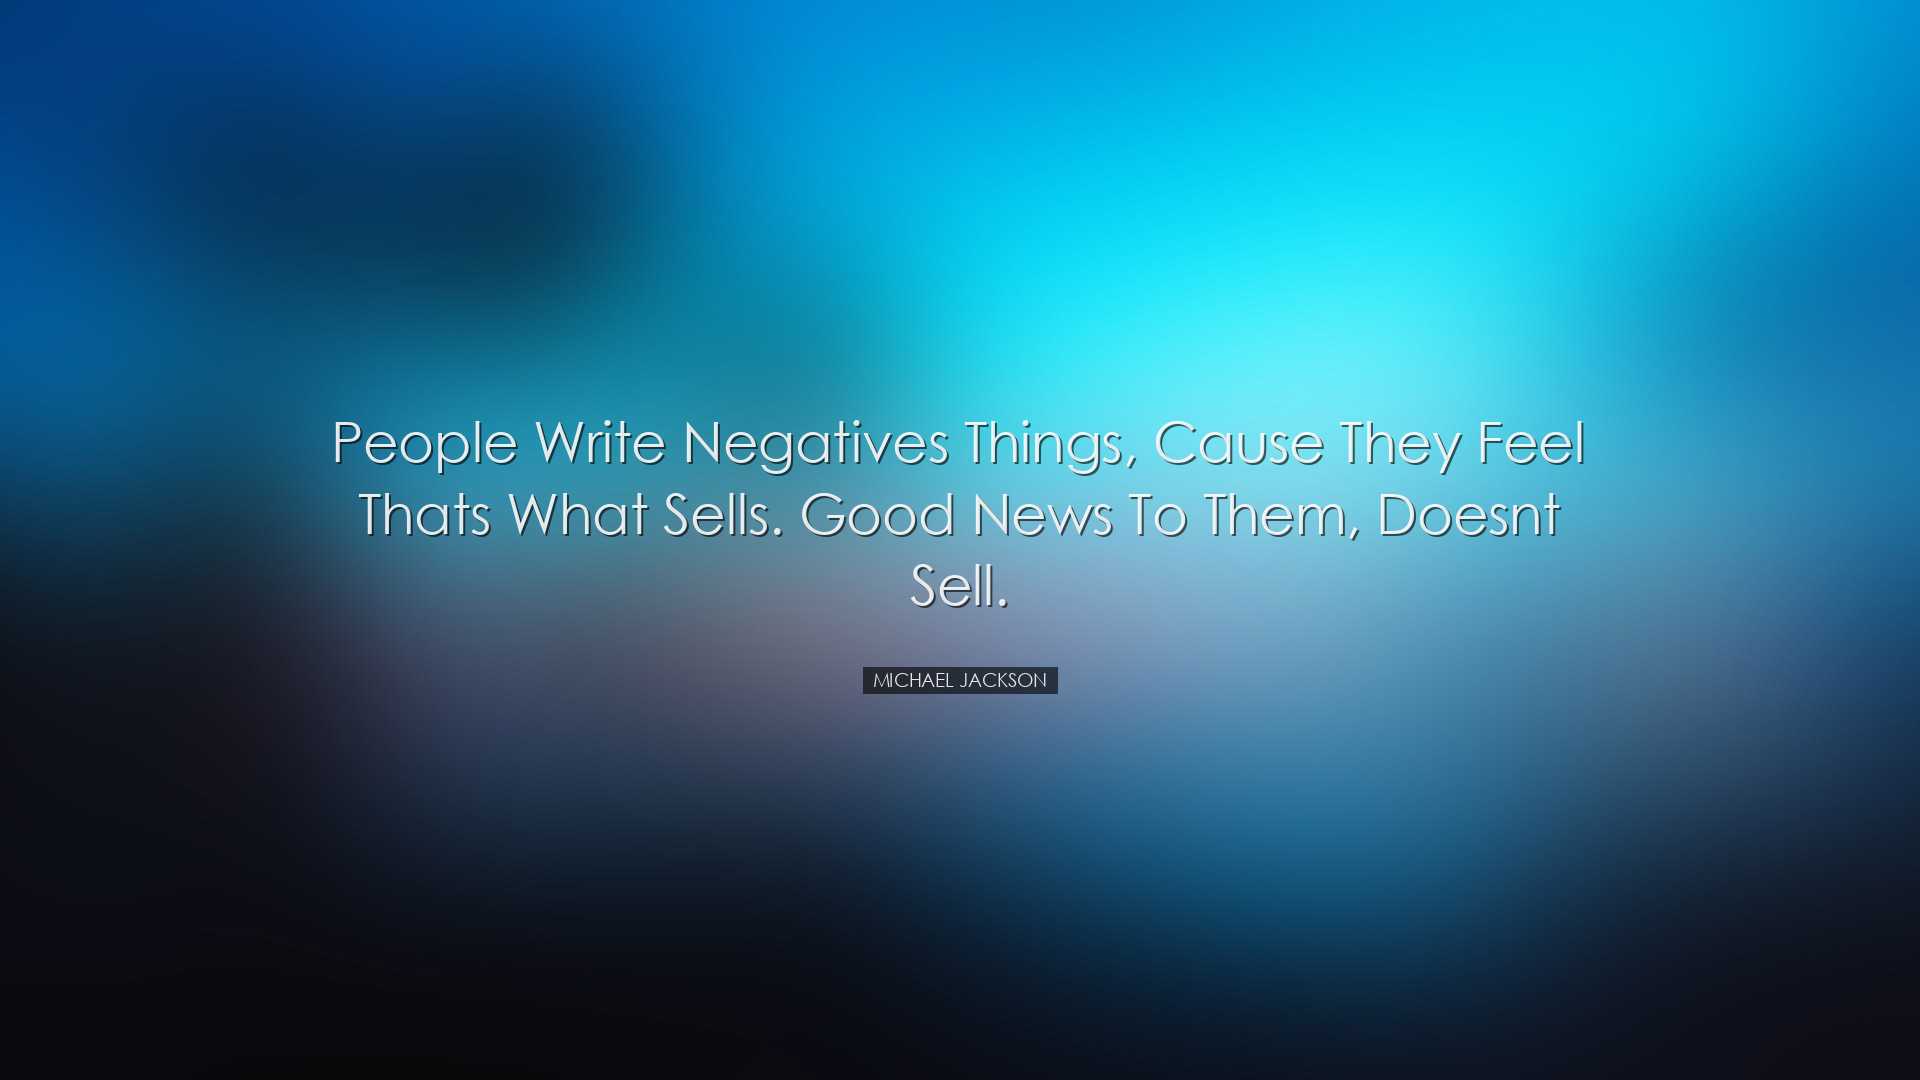 People write negatives things, cause they feel thats what sells. G